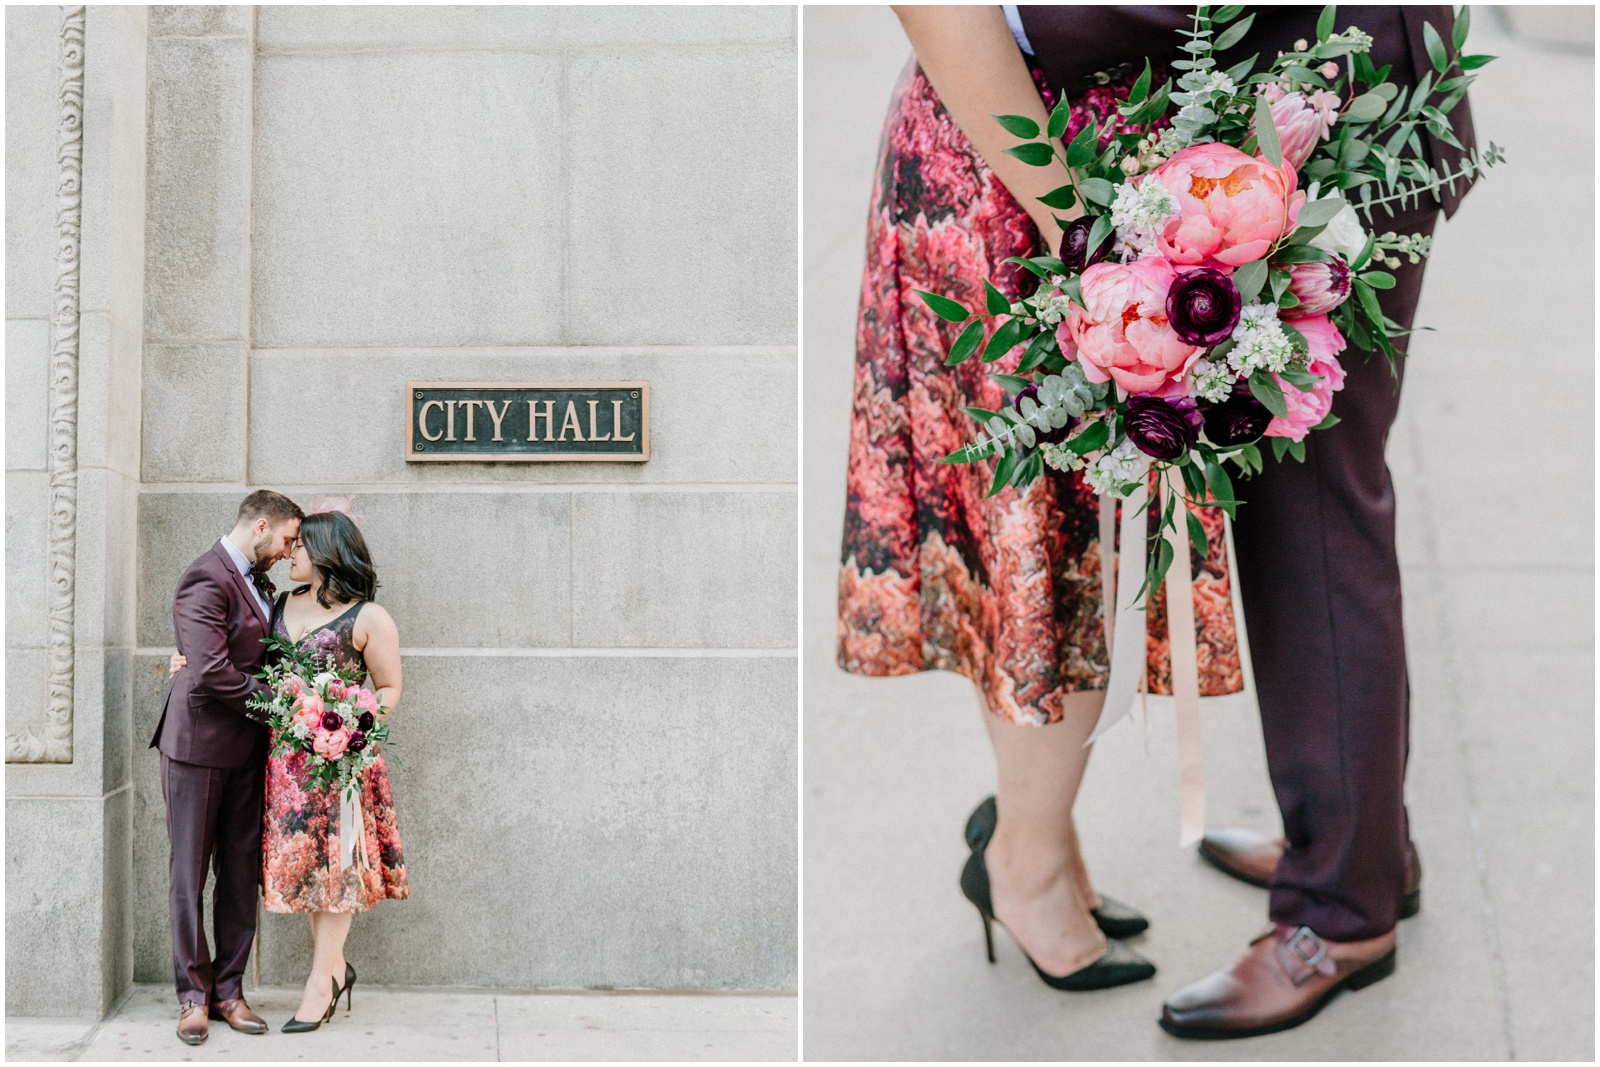 City Hall elopement in Chicago